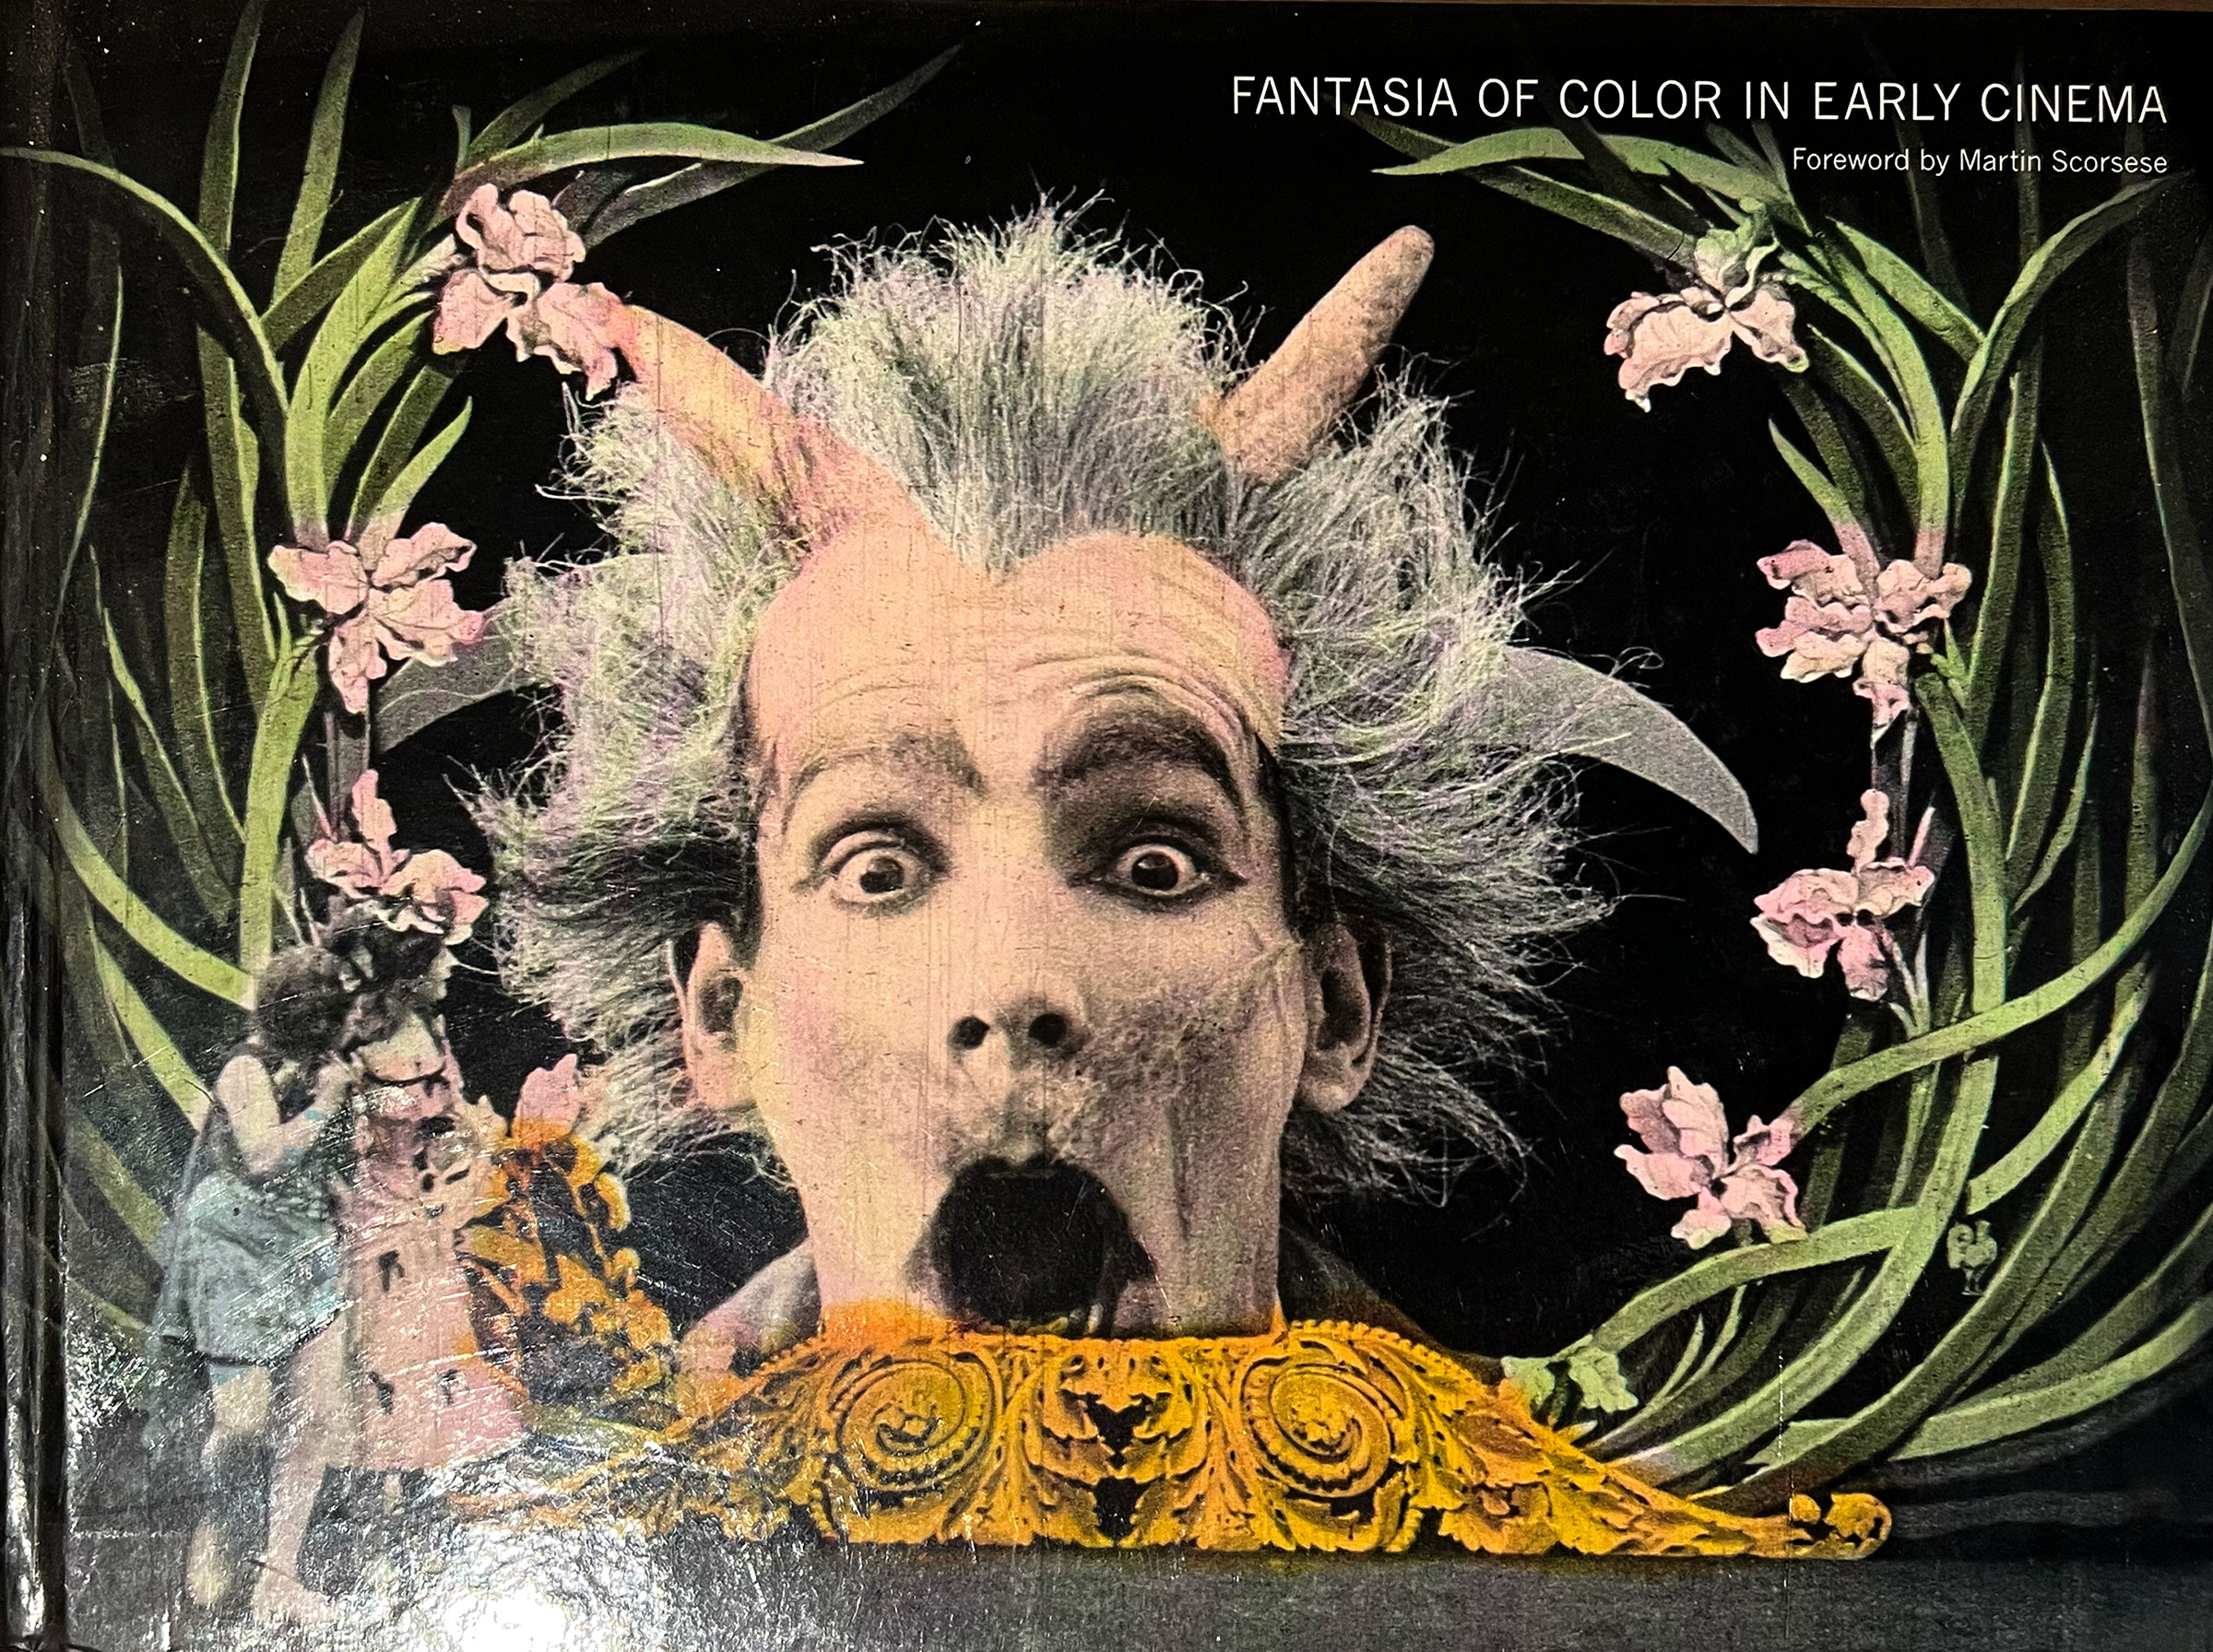 Fantasia of Color In Early Cinema